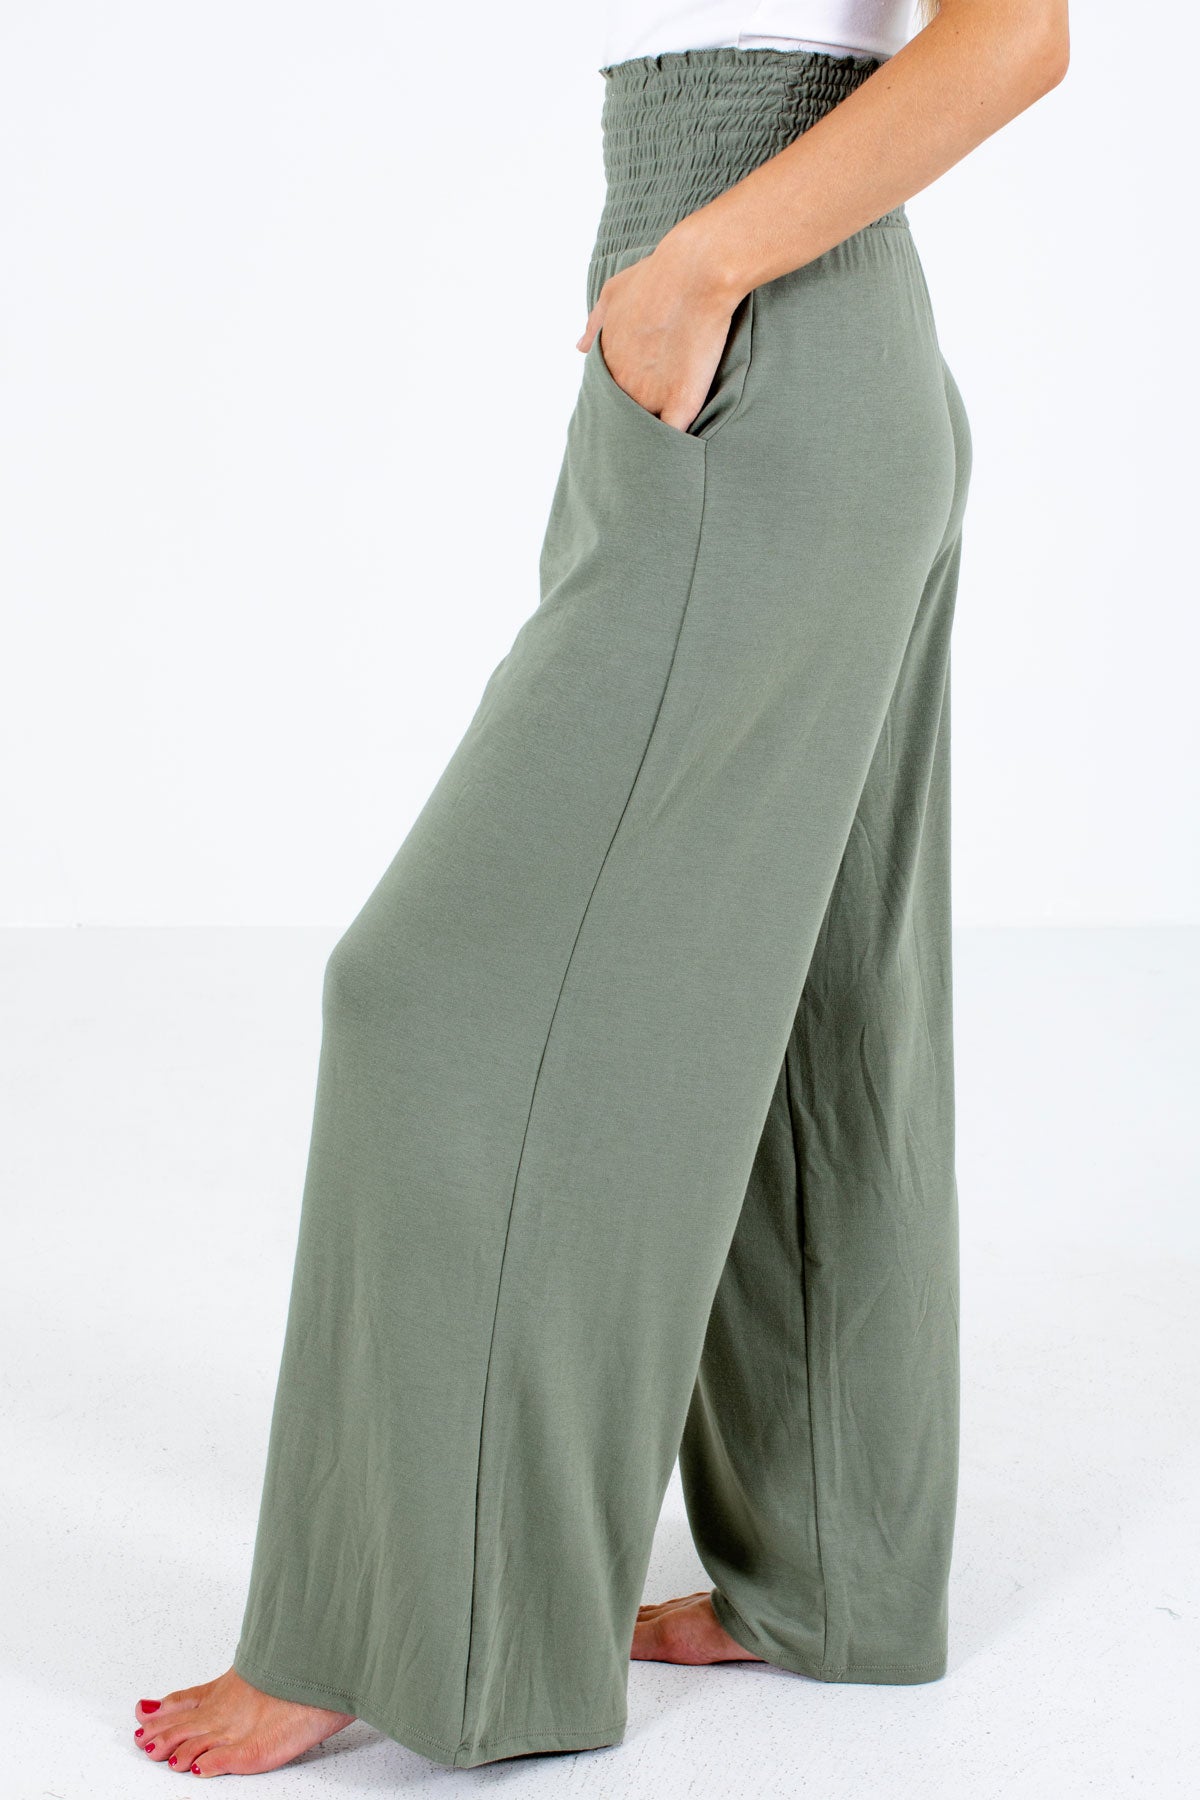 Green Affordable Online Boutique Clothing for Women